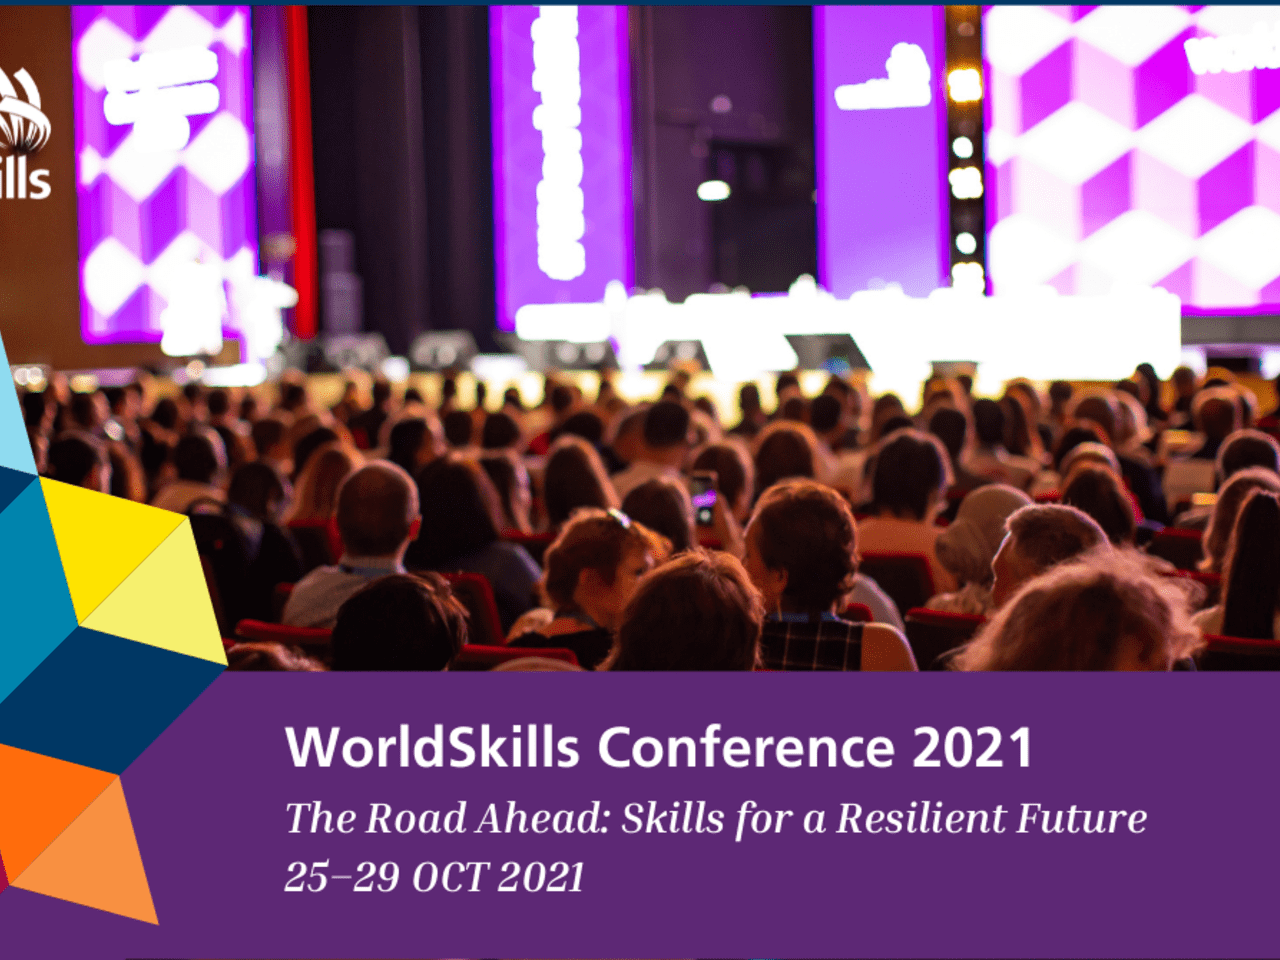 What to expect from the WorldSkills Conference 2021